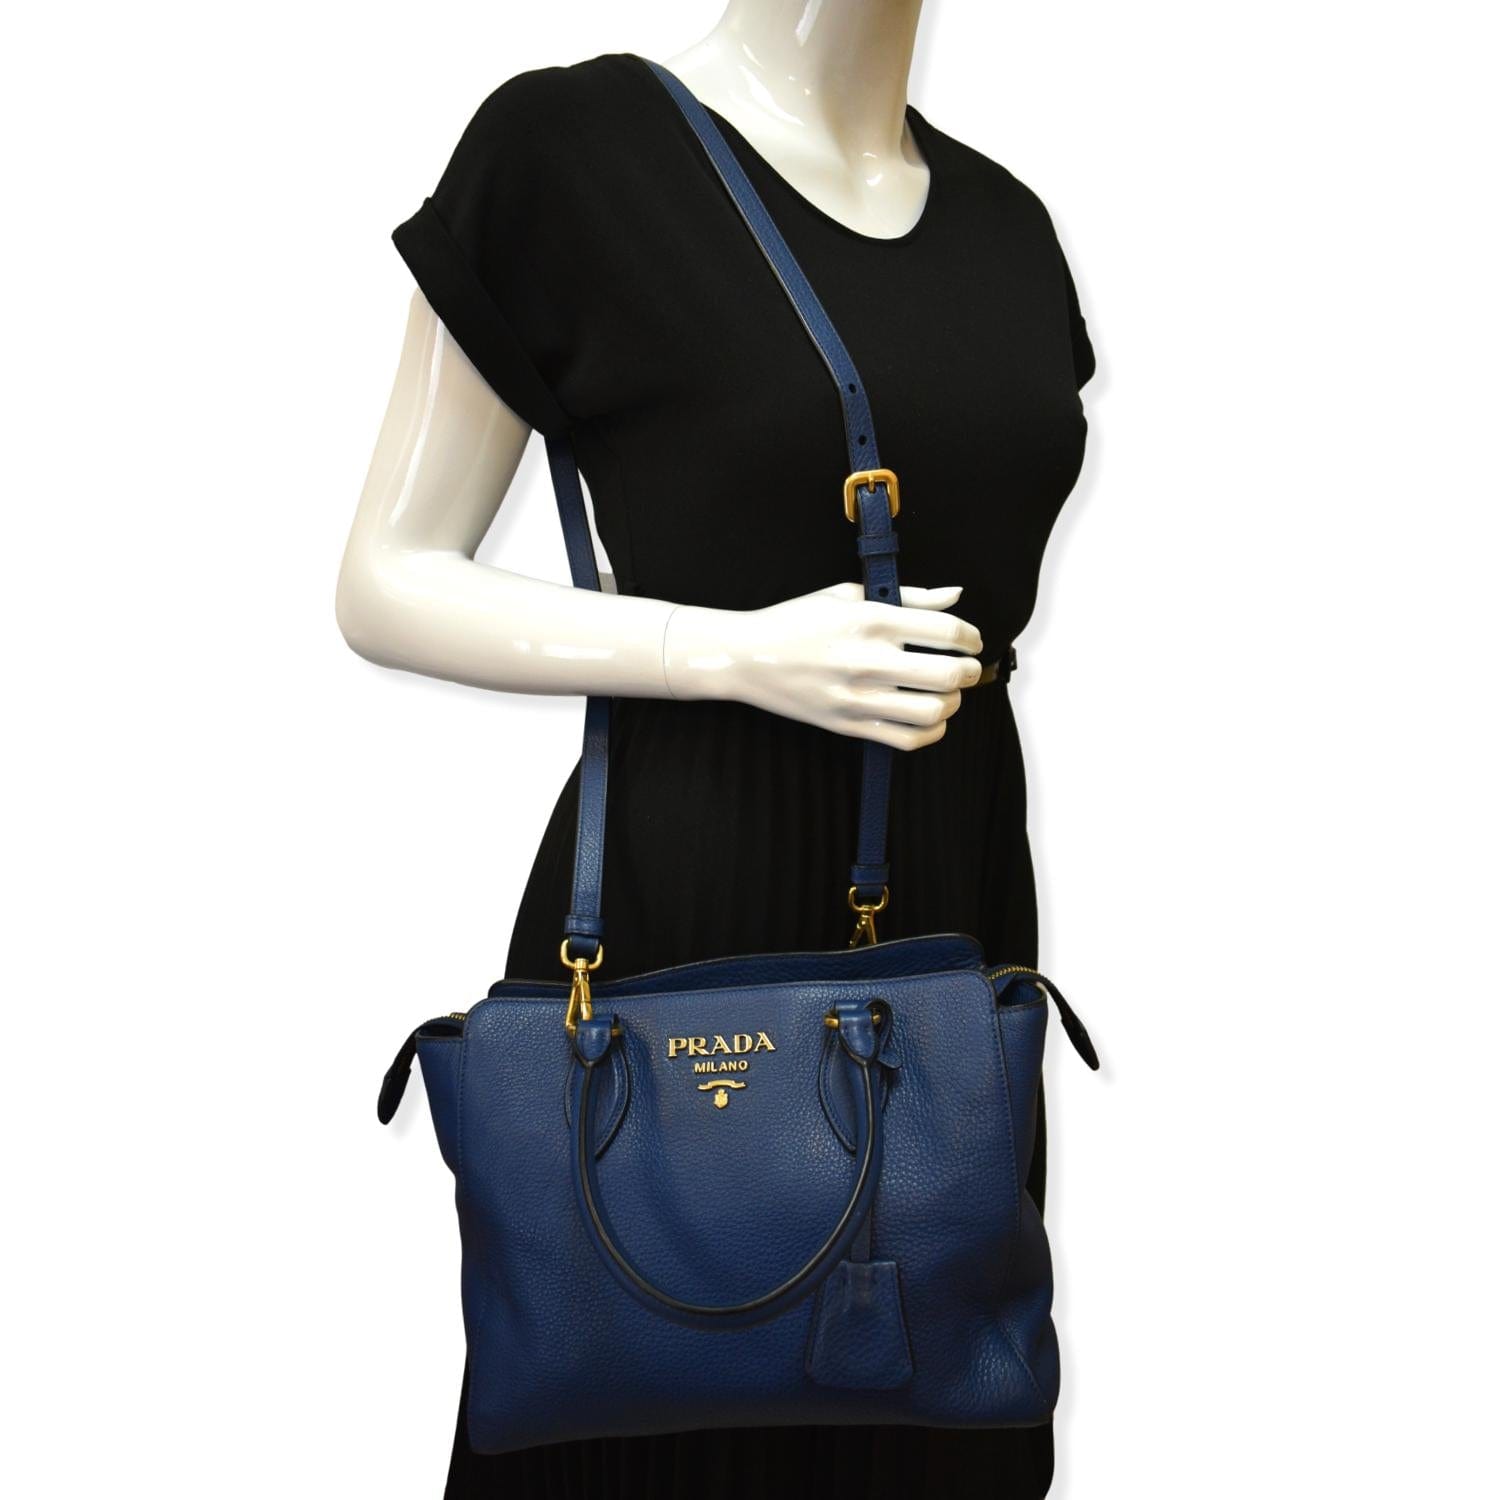 Fashion Look Featuring Prada Shoulder Bags and Prada Clutches by Sylvie -  ShopStyle